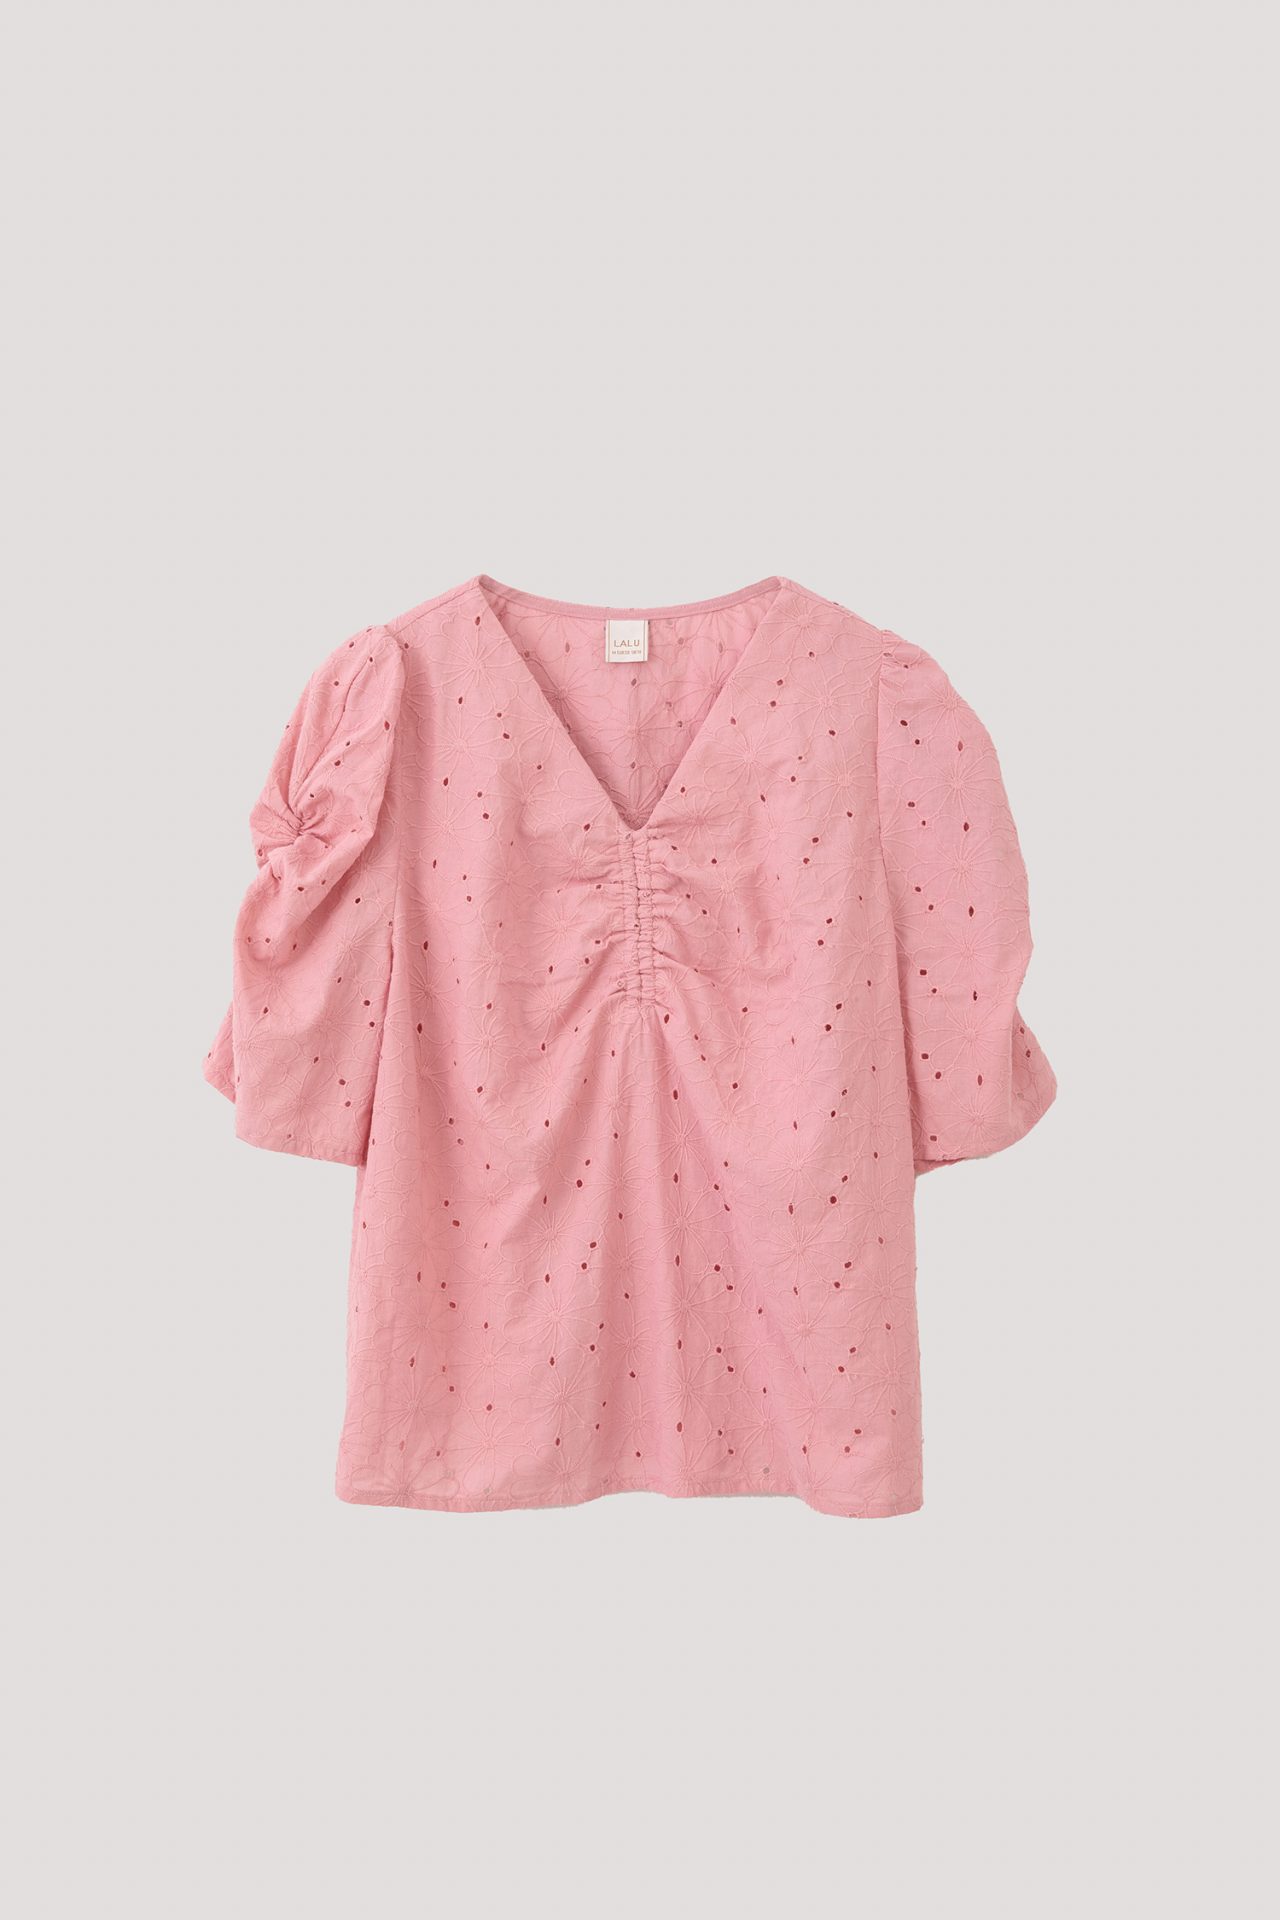 Scrunched Front Blouse - iORA SINGAPORE